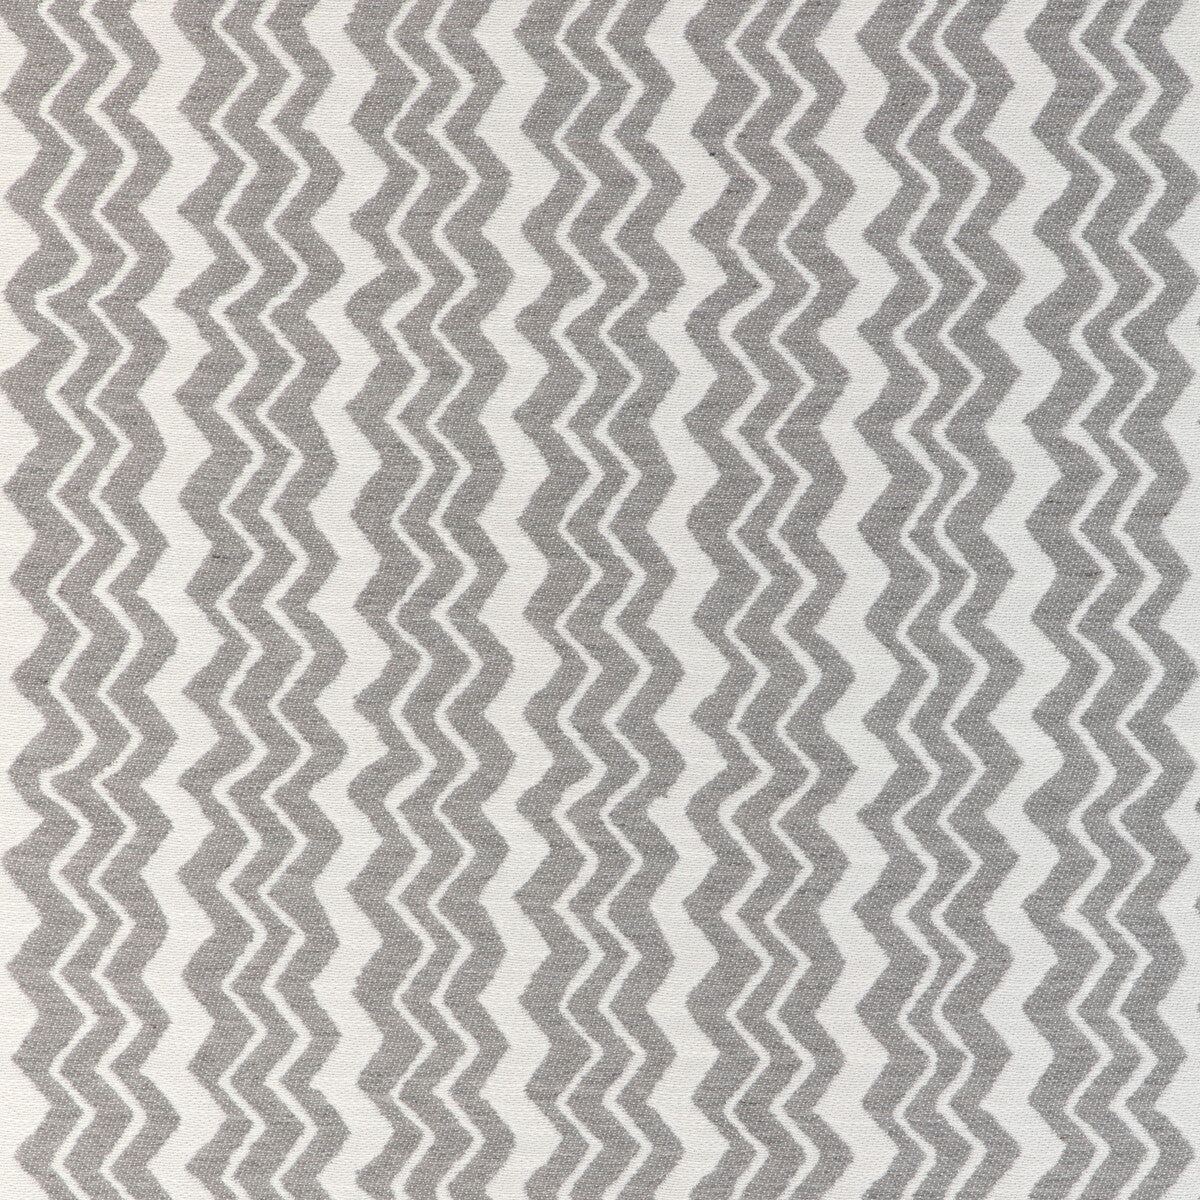 Matipi fabric in driftwood color - pattern 36925.11.0 - by Kravet Couture in the Riviera collection